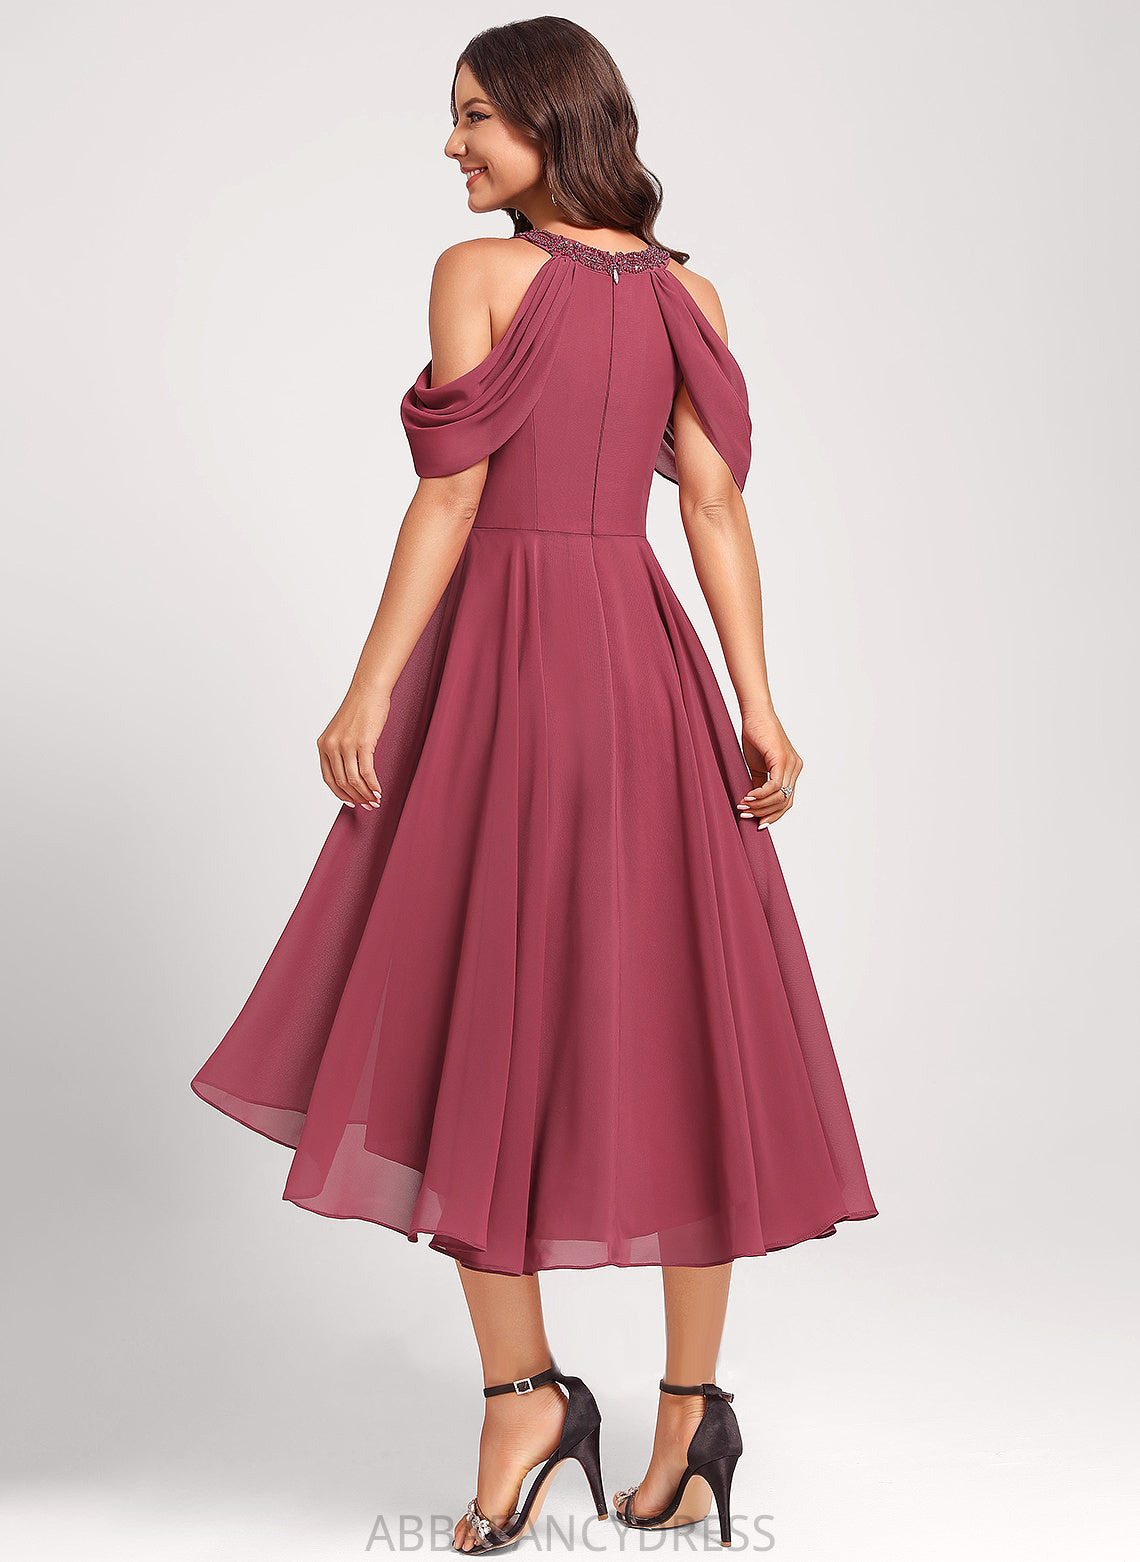 Eve Dress Chiffon Beading Scoop A-Line Neck Cocktail Asymmetrical With Sequins Club Dresses